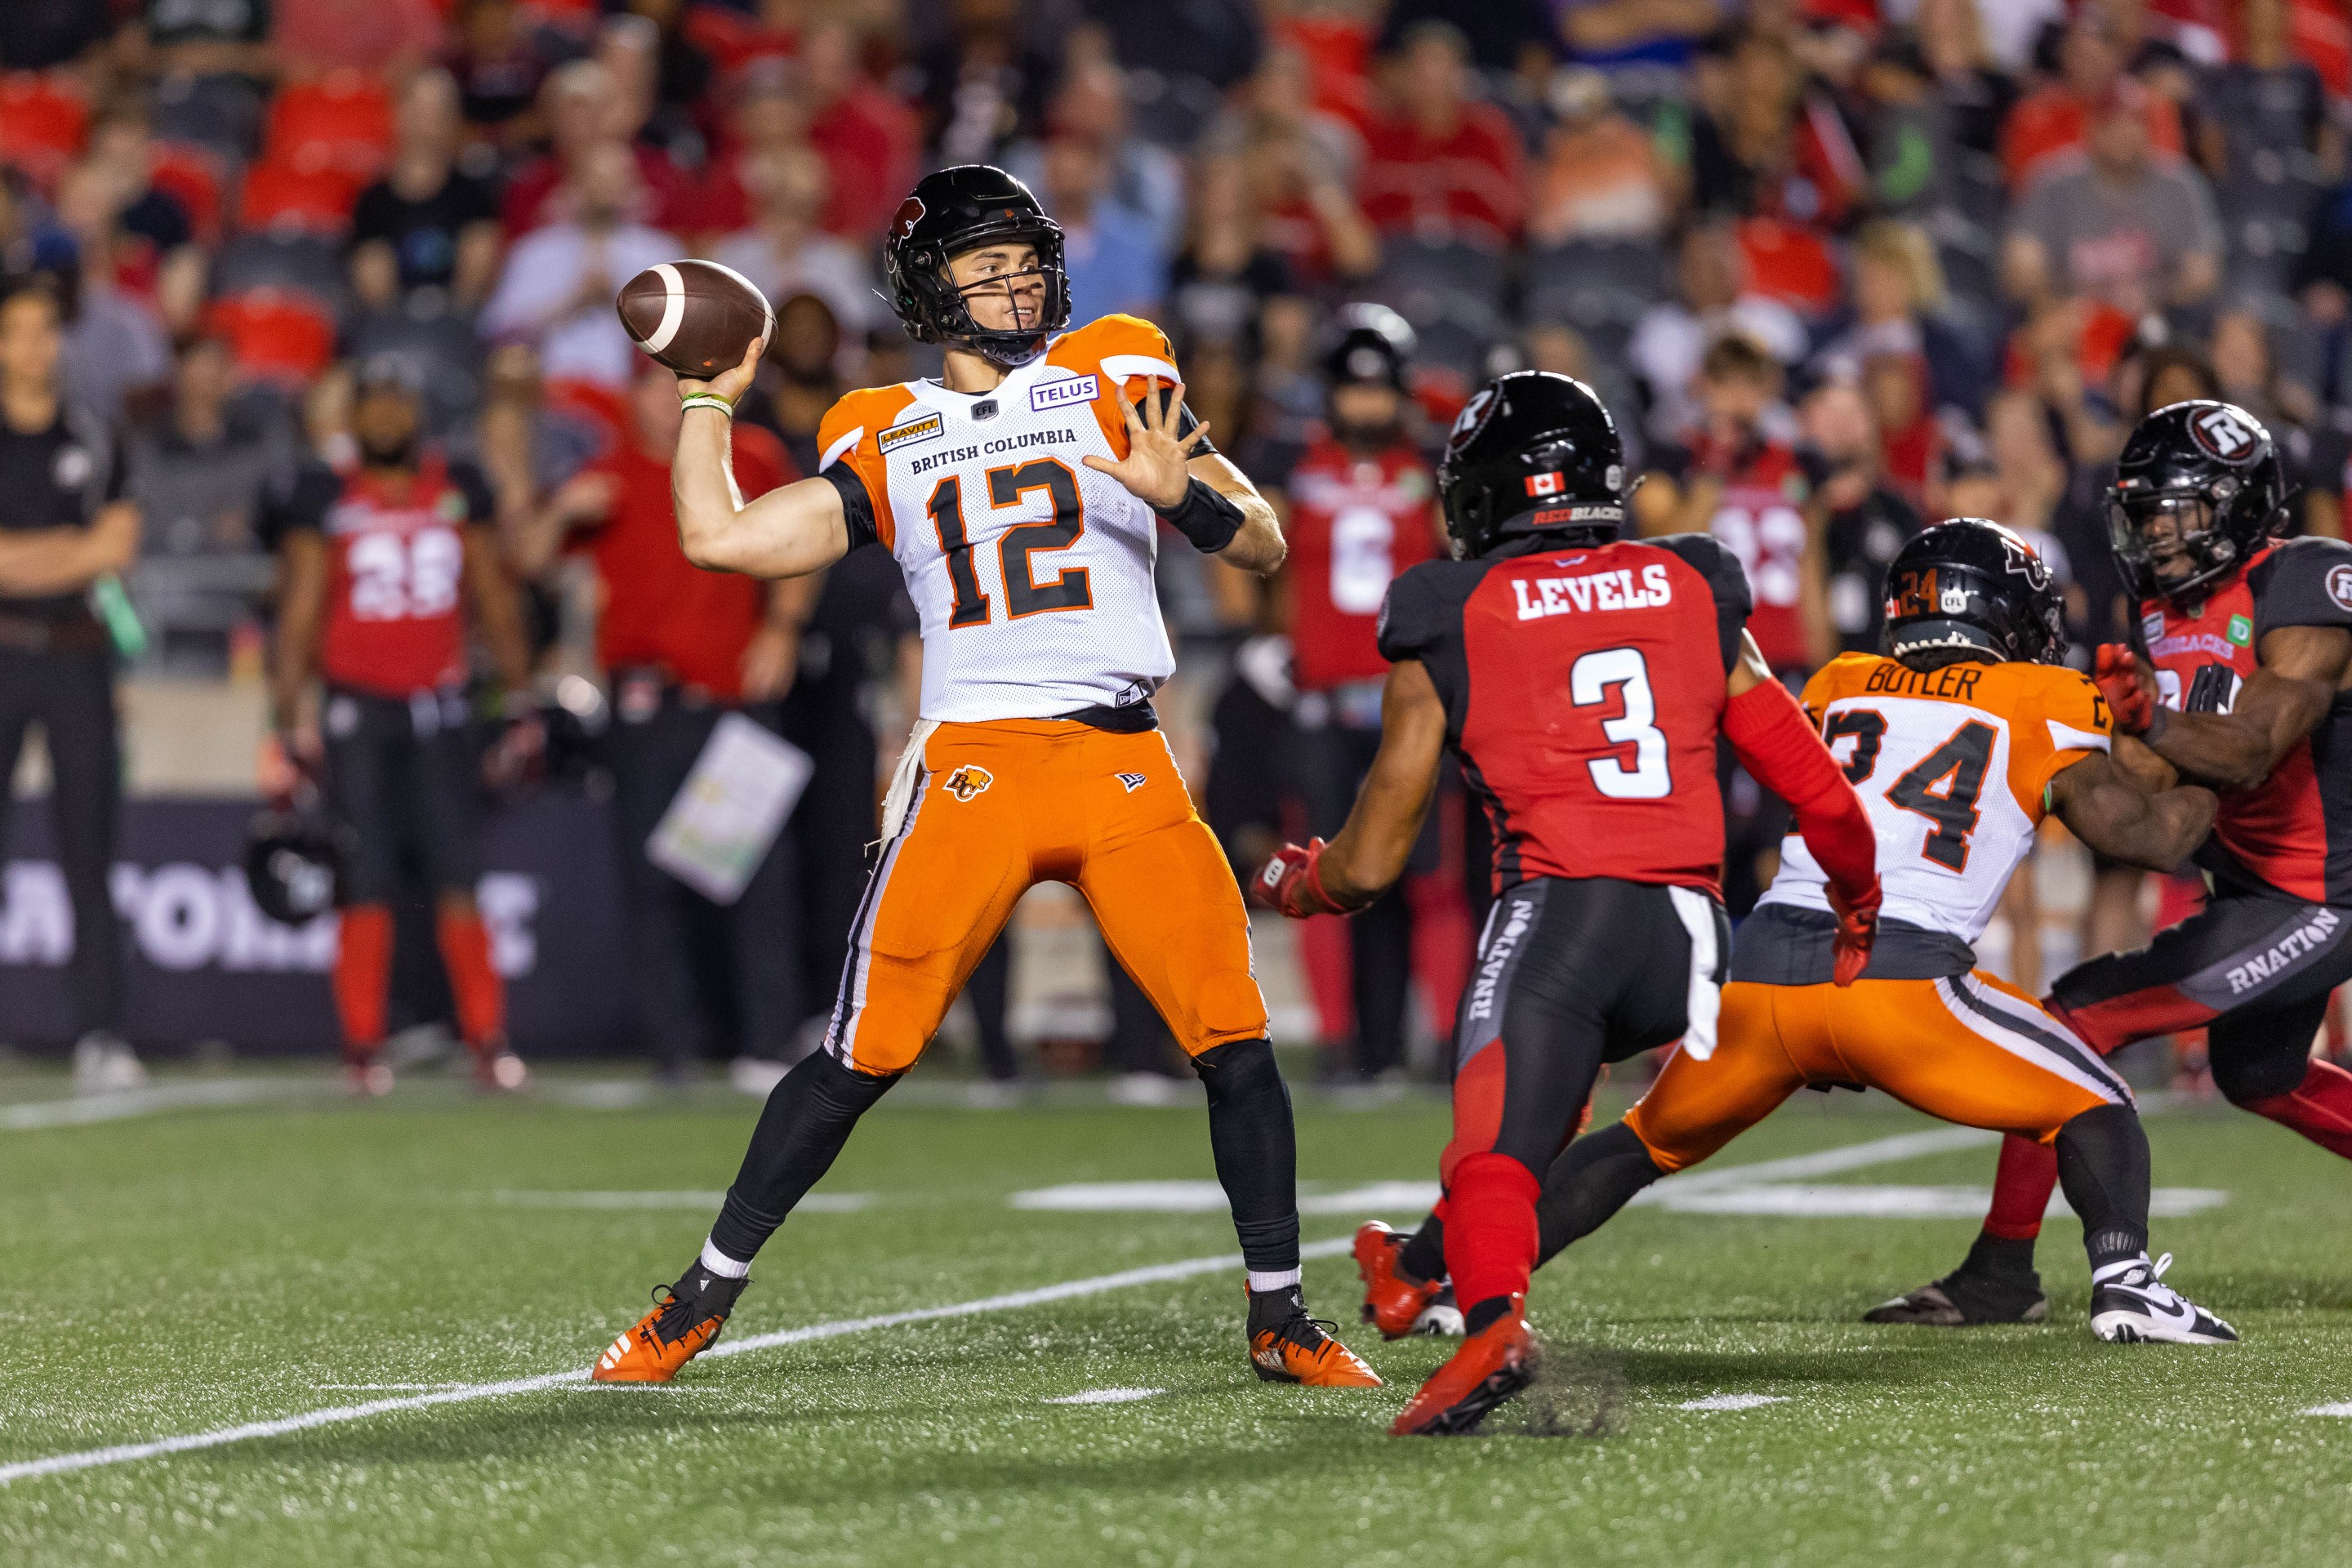 OTTAWA, ON - JUNE 30: BC Lions quarterback Nathan Rourke (12) looks to throw the ball during Canadian Football League action between the BC Lions and Ottawa Redblacks on June 30, 2022, at TD Place at Lansdowne Park in Ottawa, ON, Canada.